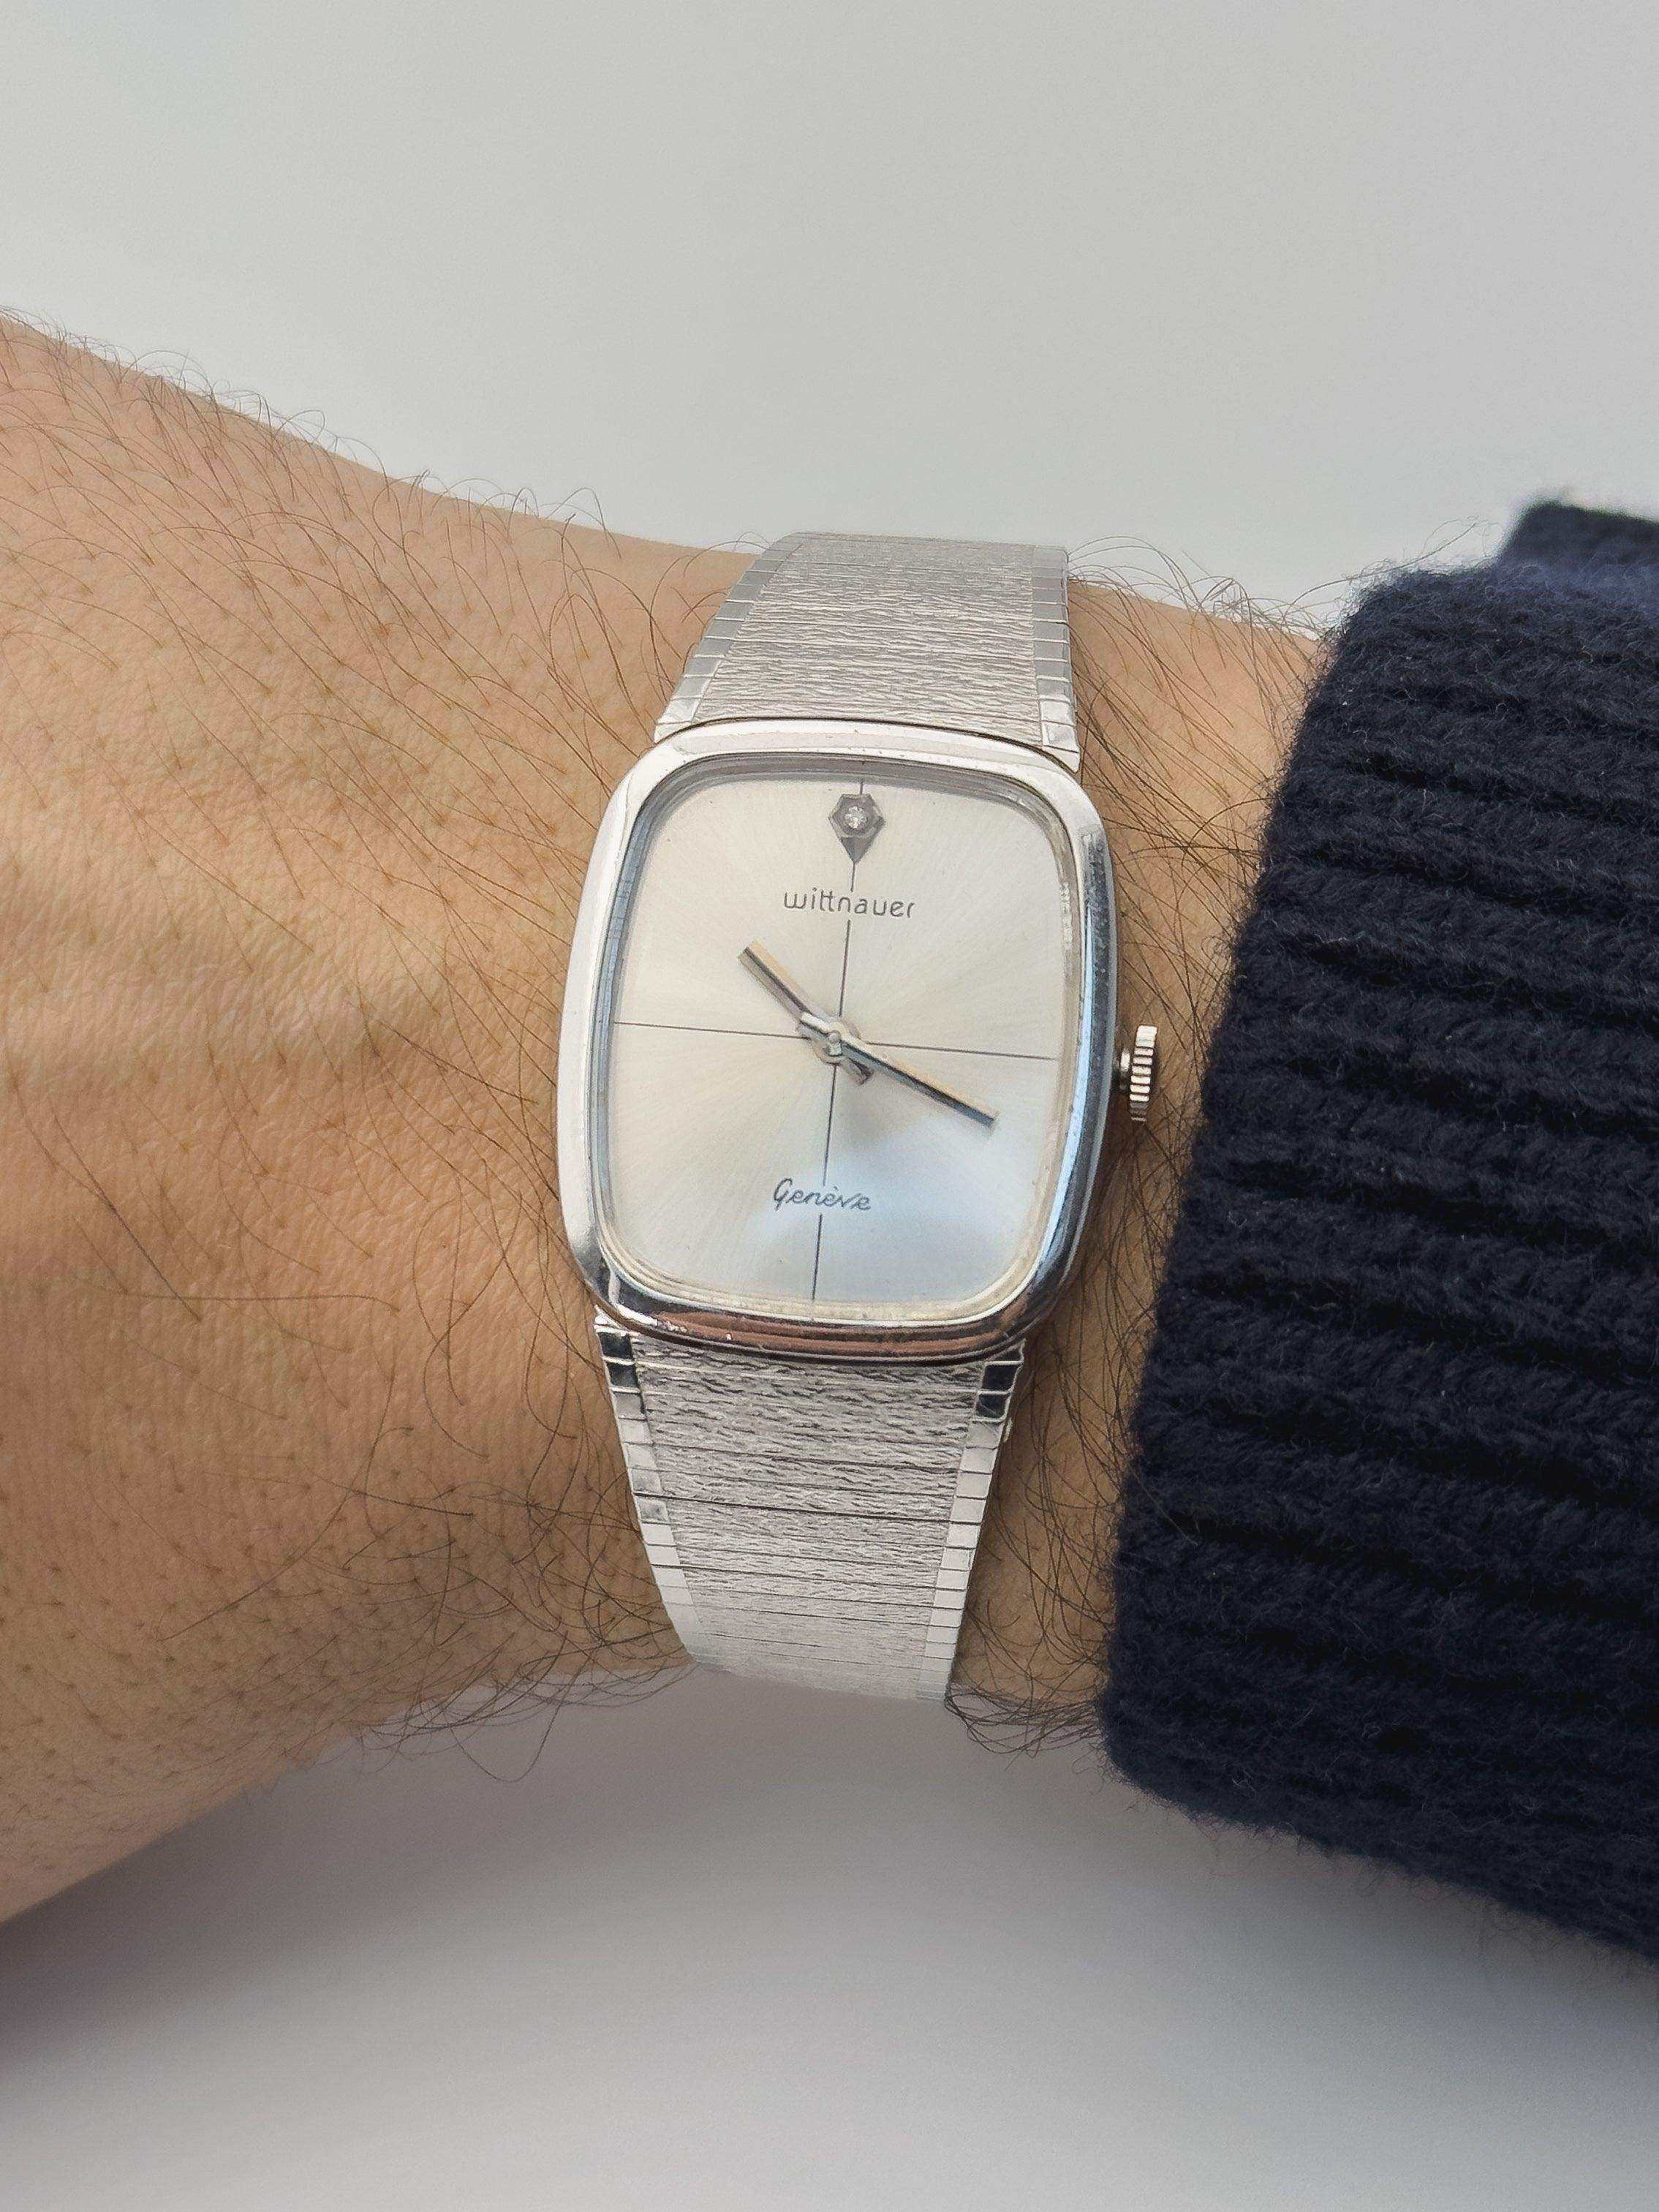 Wittnauer by Longines - Classy White Gold Plated - 1970's - Atelier Victor